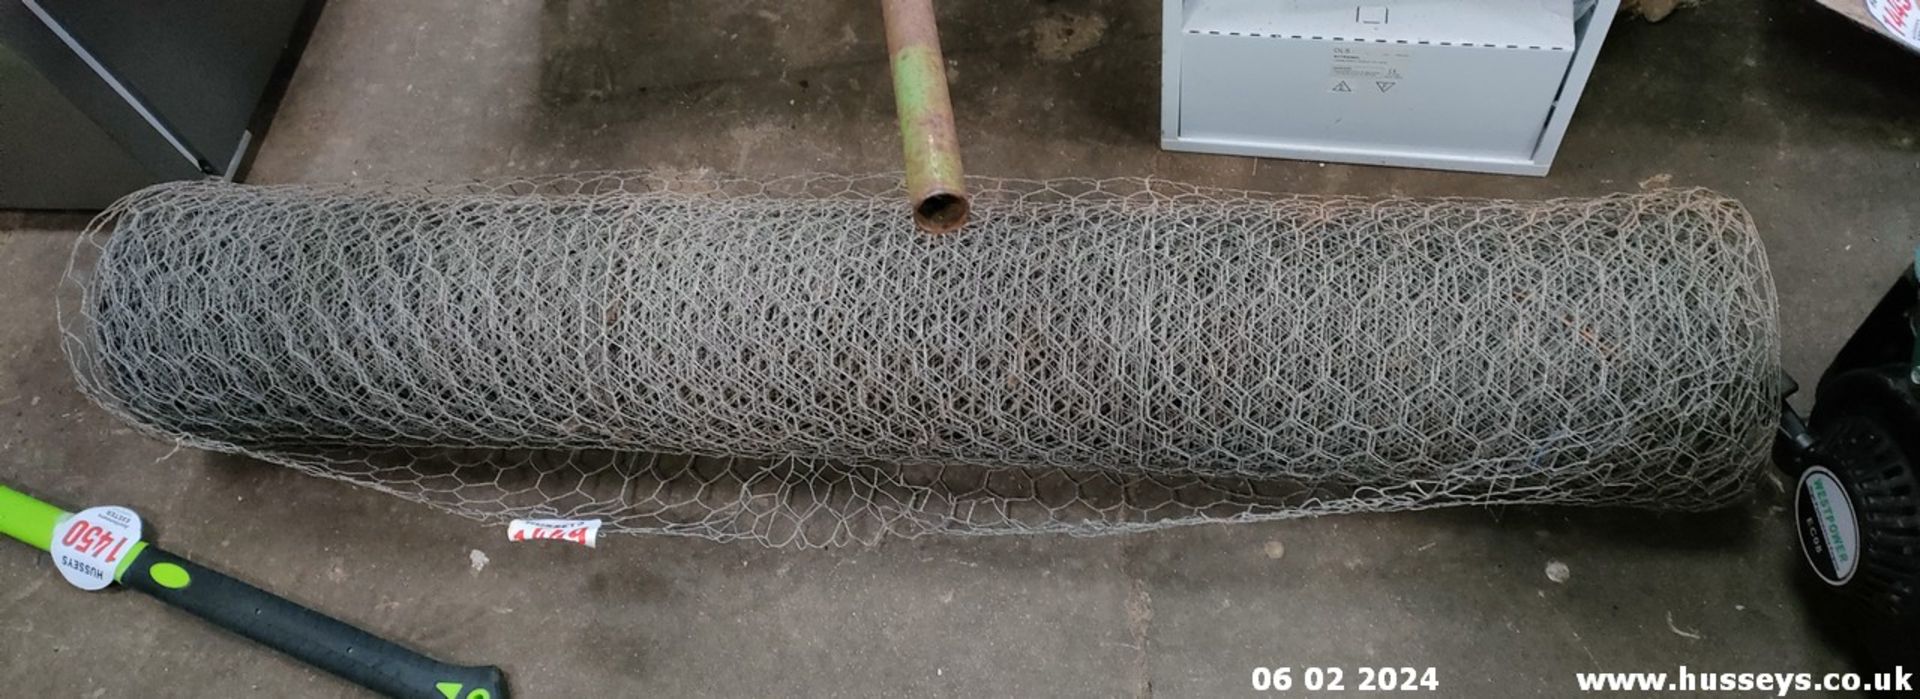 LARGE ROLL OF CHICKEN OR PHEASANT WIRE